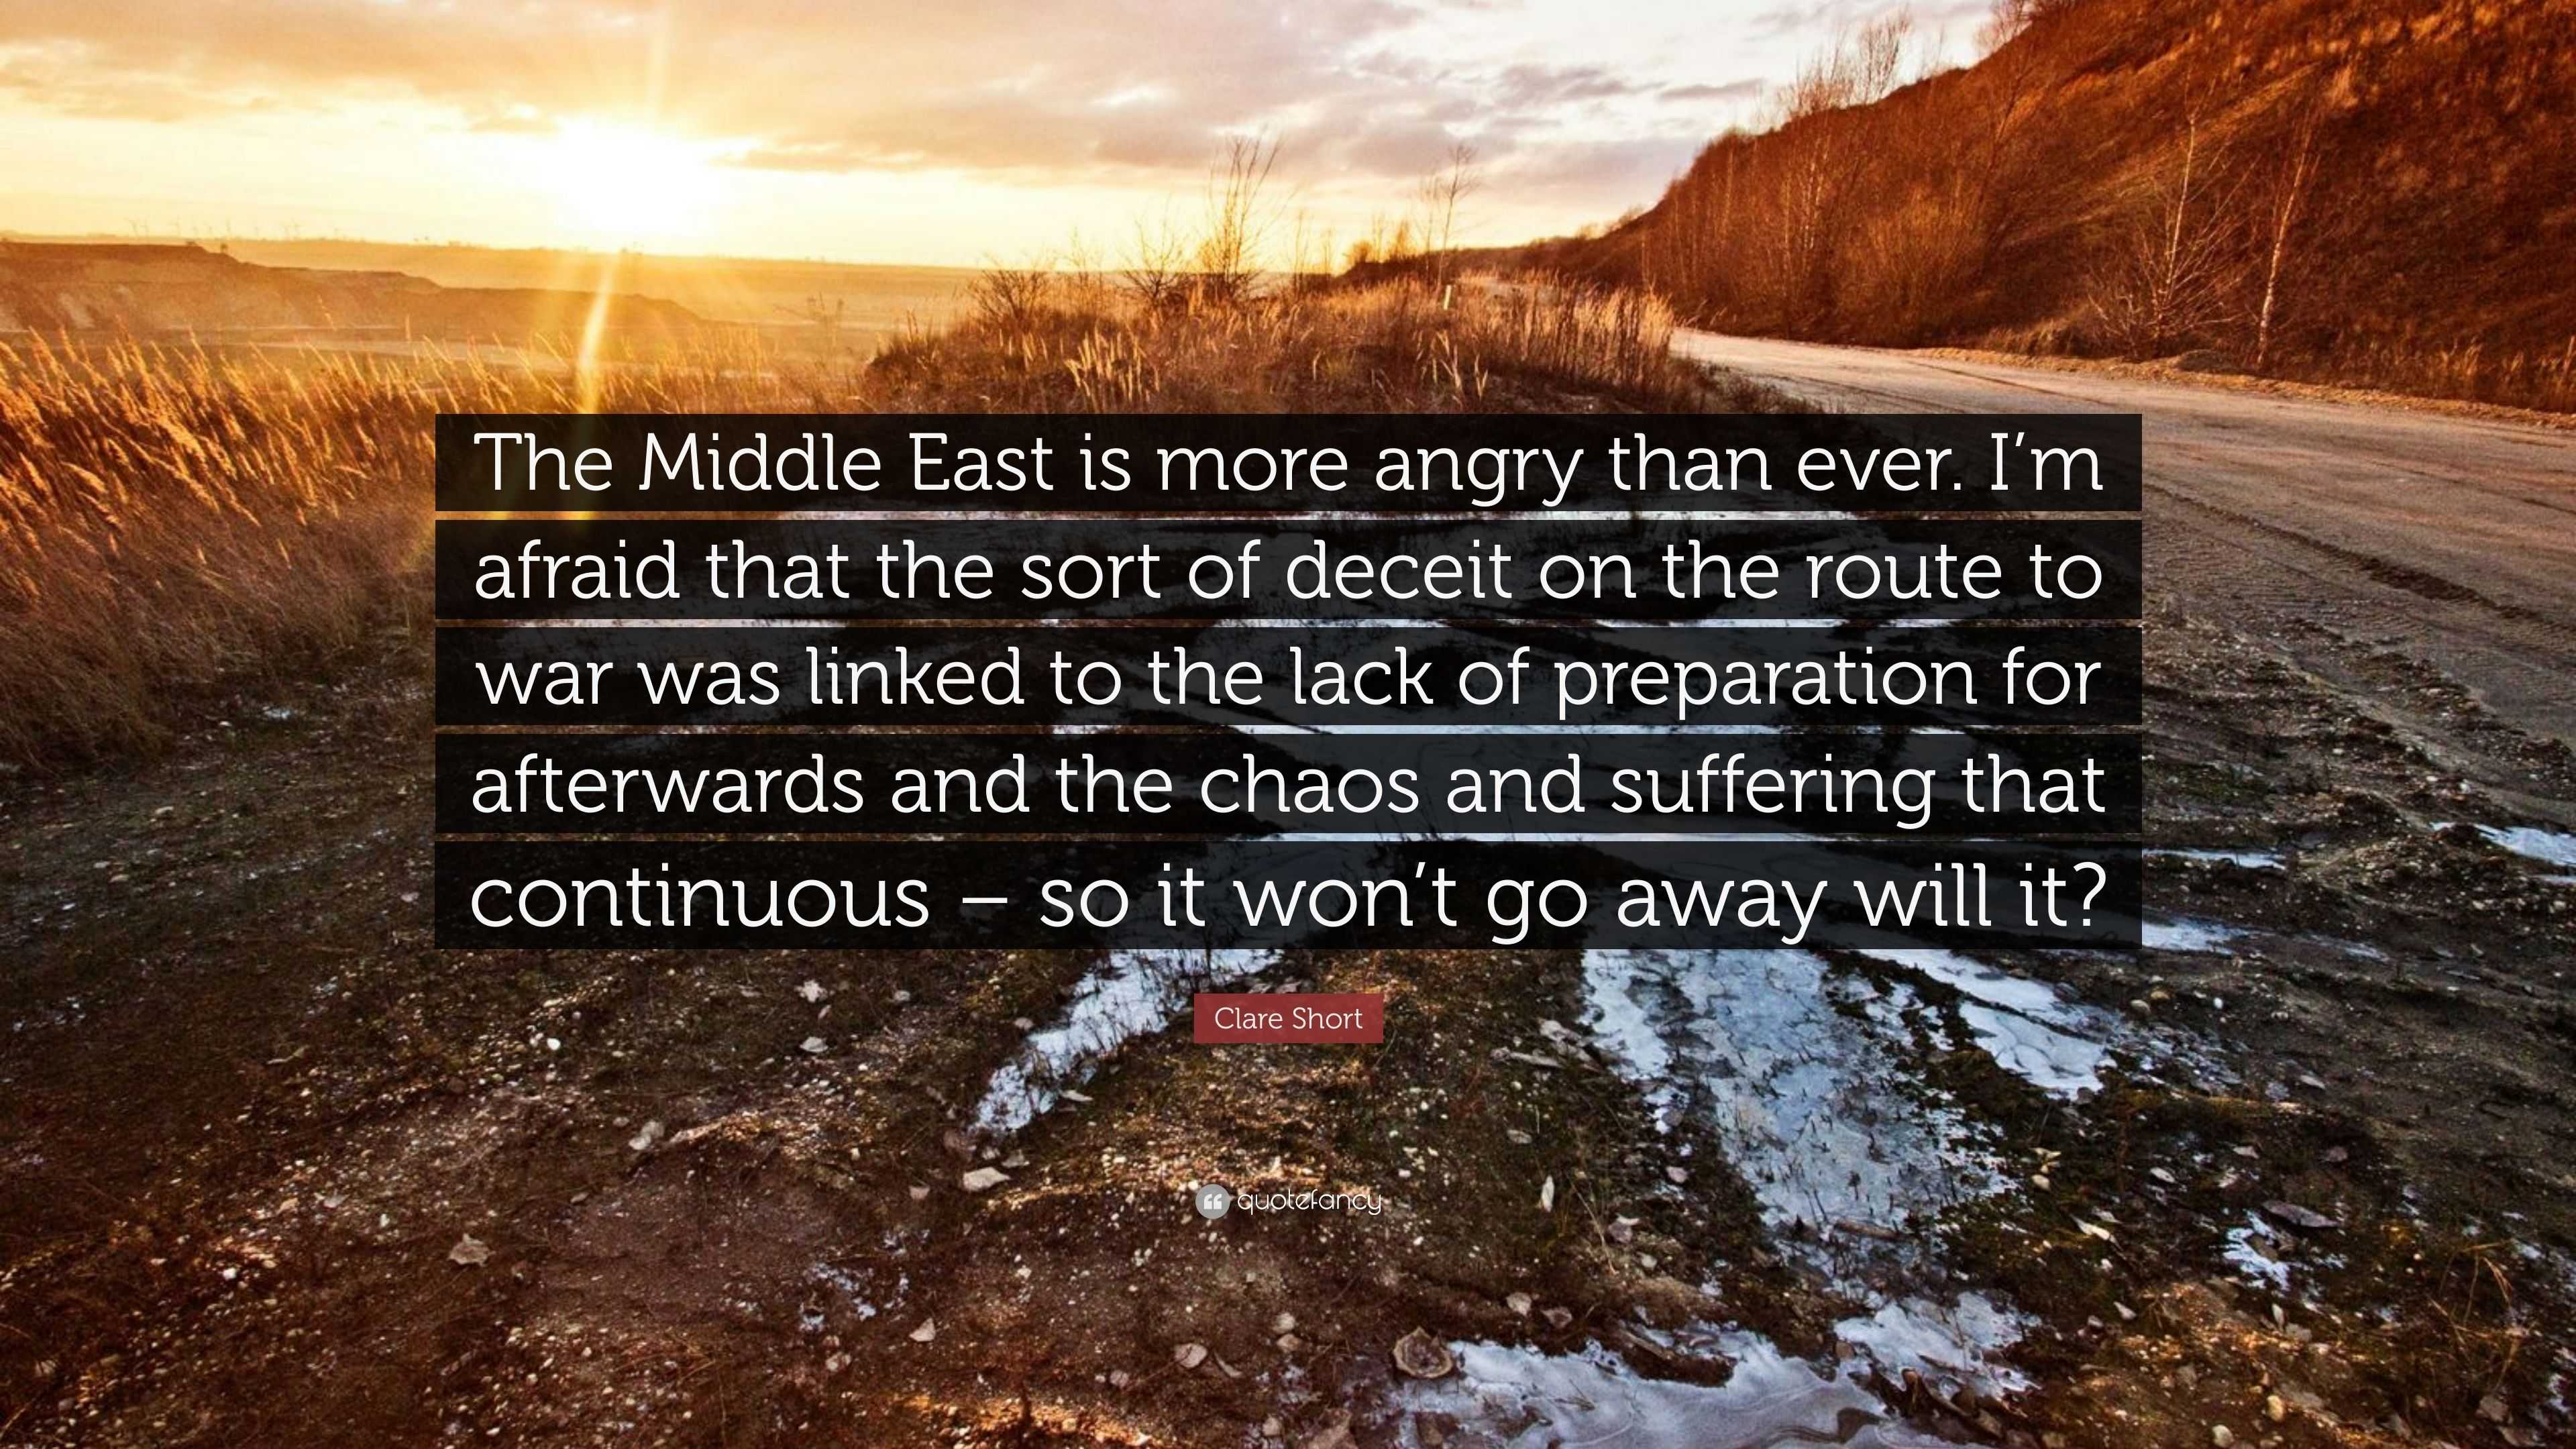 Clare Short Quote “the Middle East Is More Angry Than Ever Im Afraid That The Sort Of Deceit